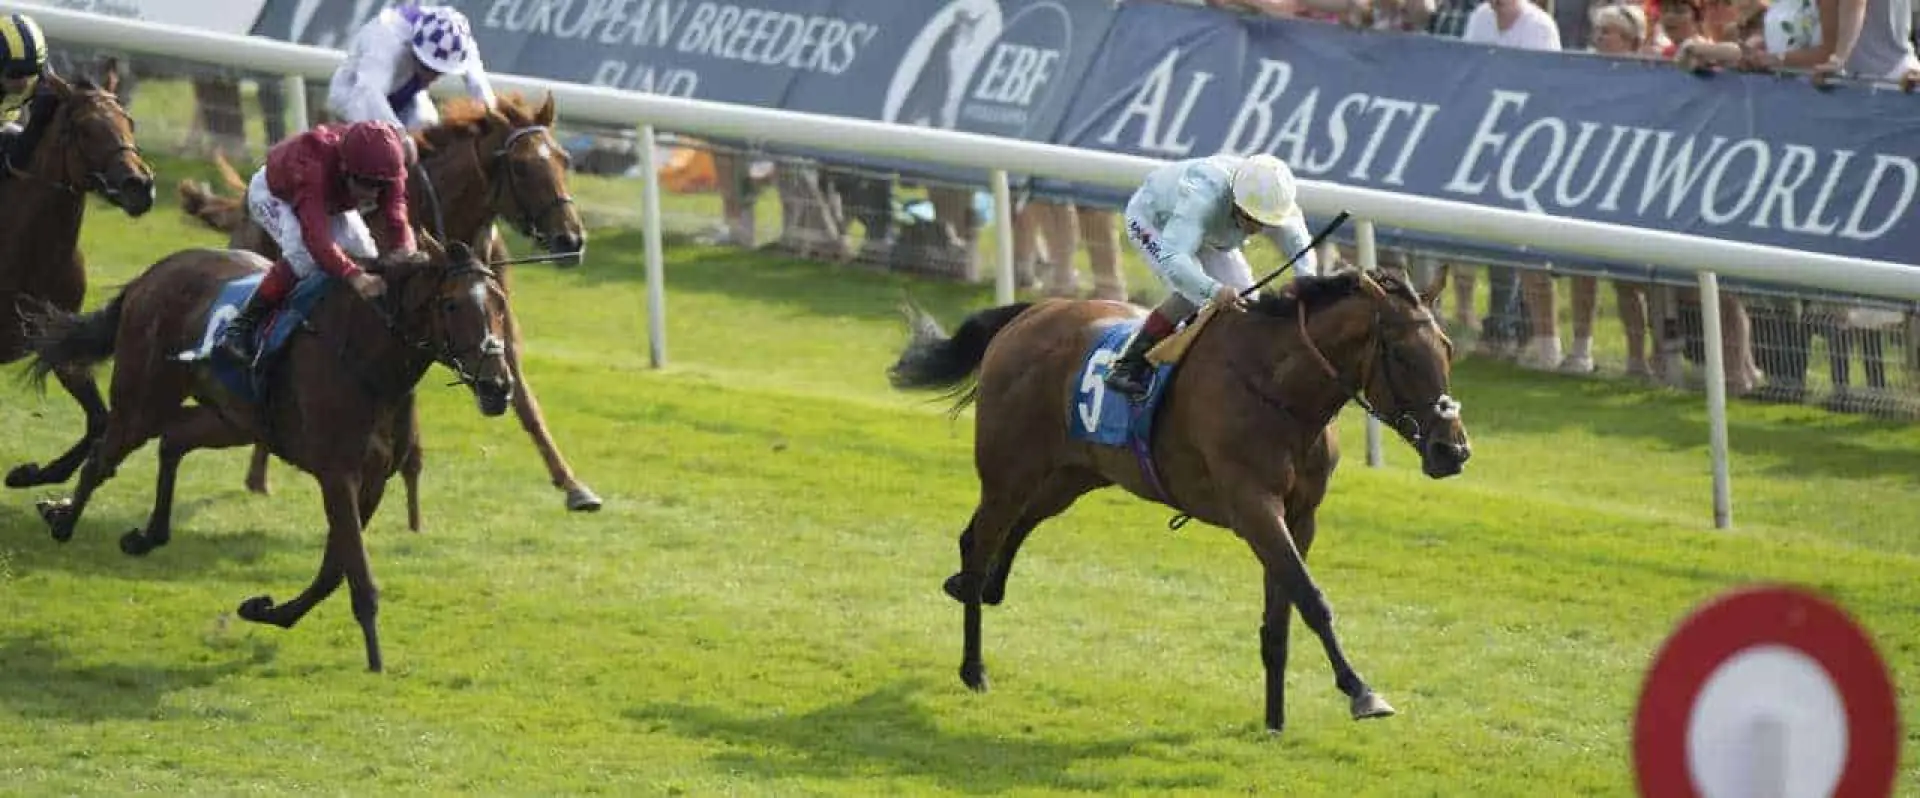 Coral's Park Hill Stakes tips point to Abingdon odds from among Sir Michael Stoute bets on day 2 of the St Leger Festival from Doncaster.